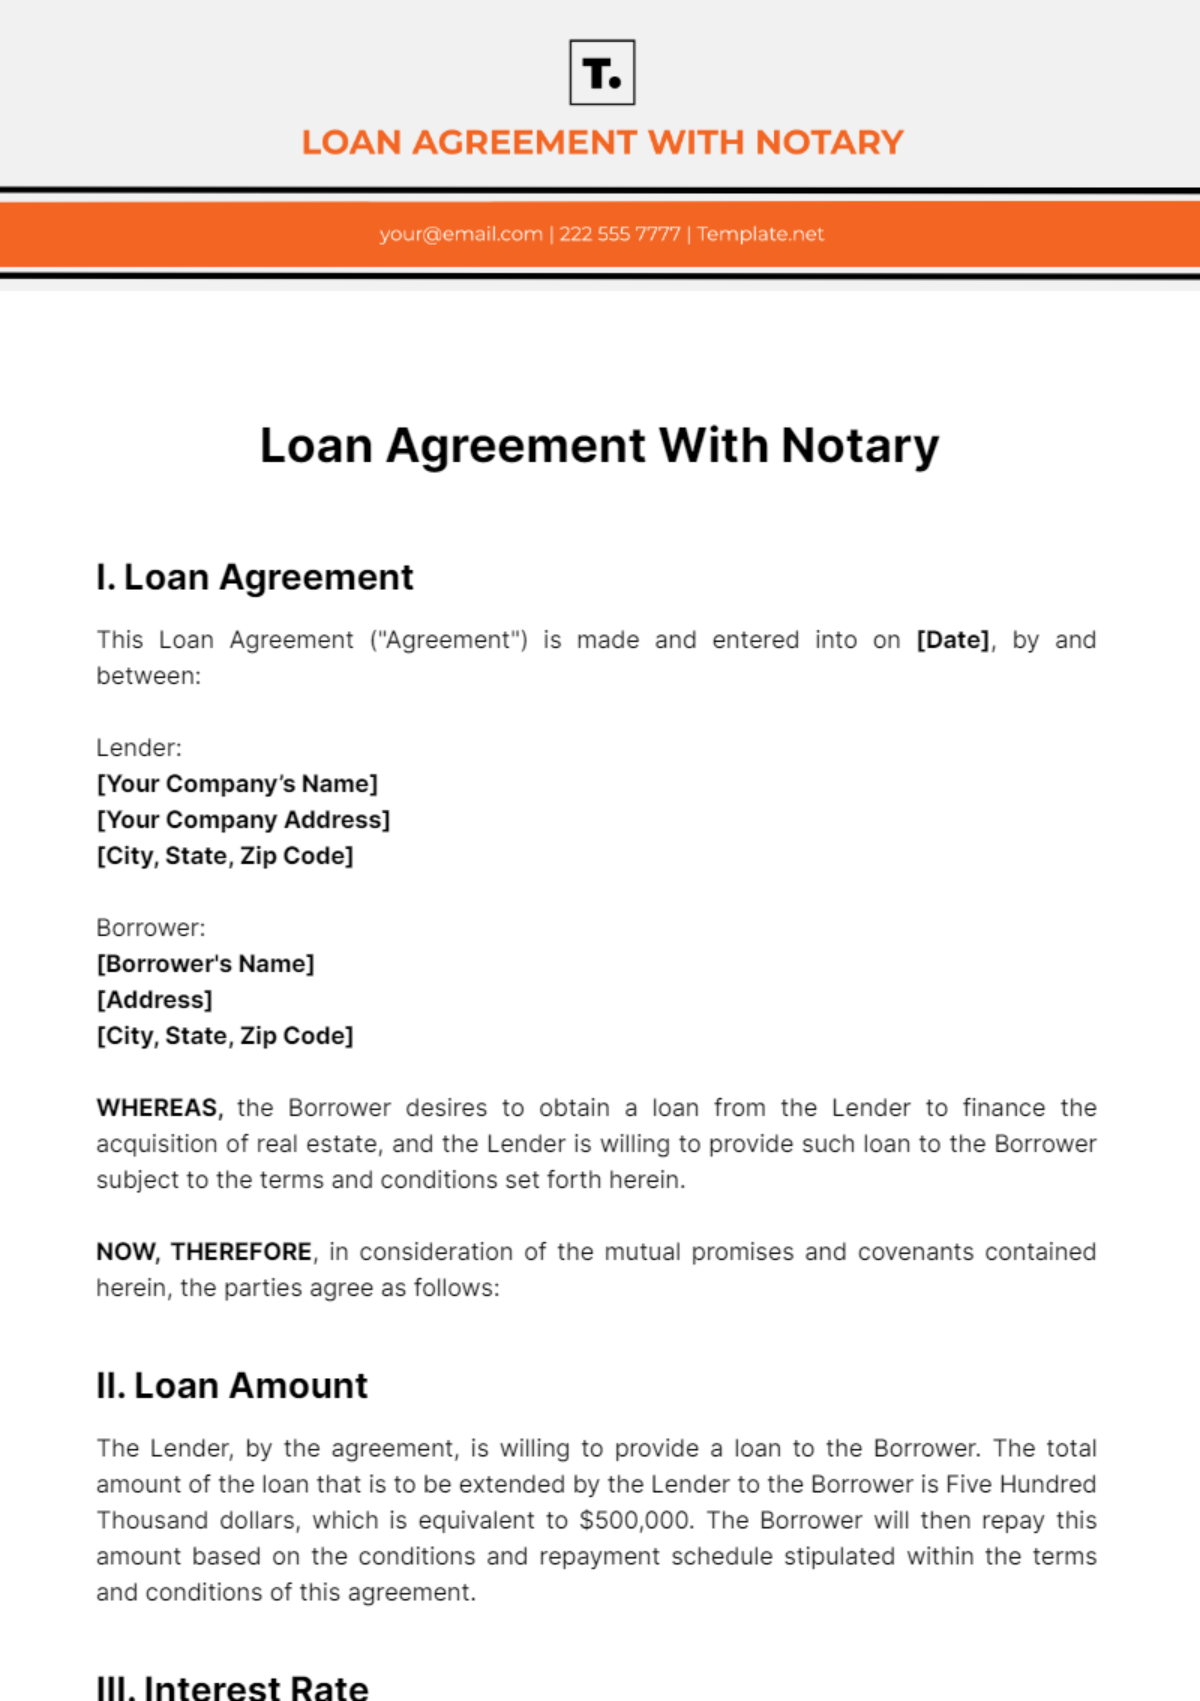 Loan Agreement With Notary Template